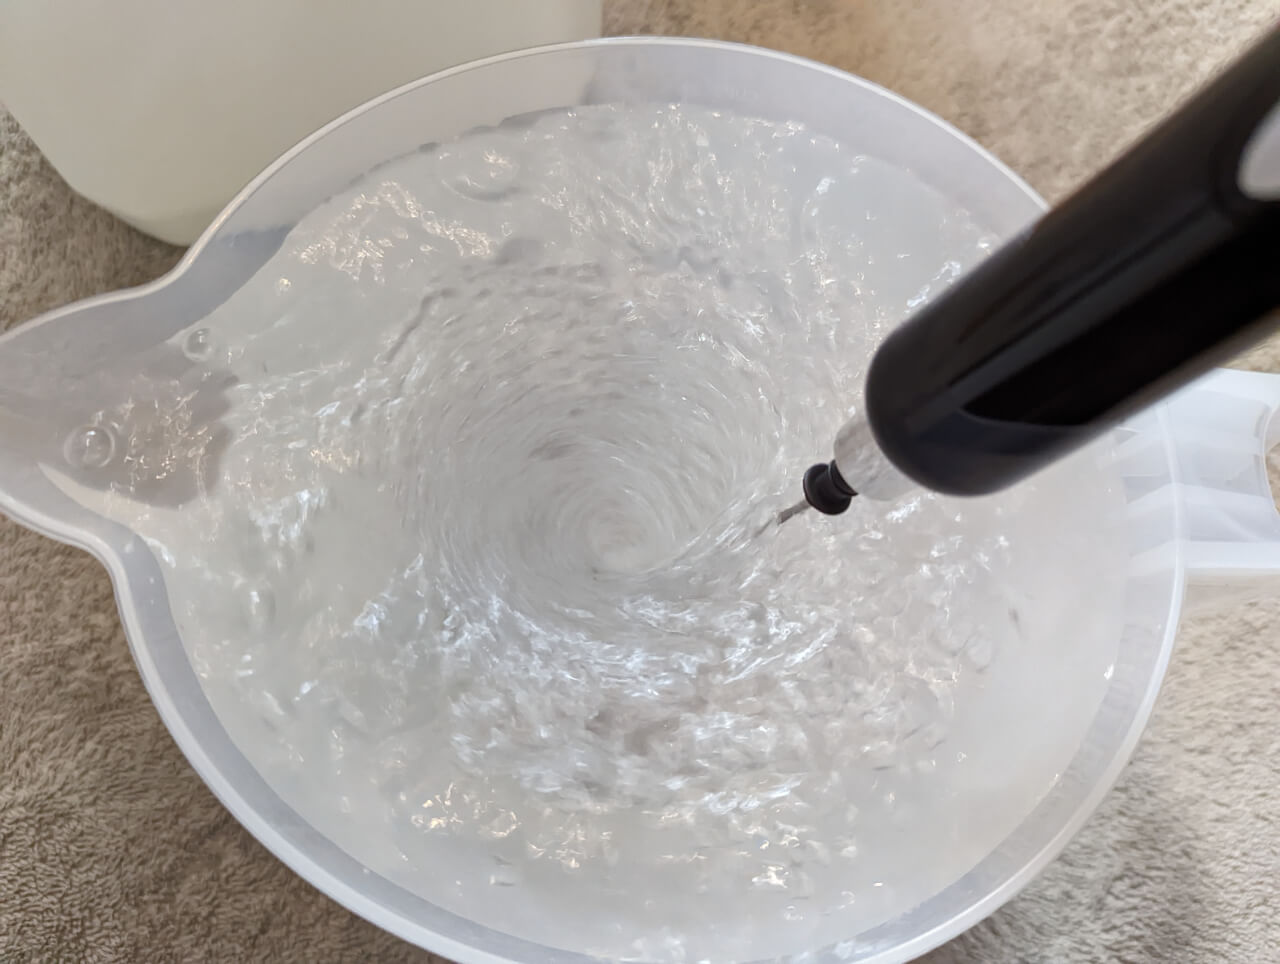 Stirring salt mixture into a jug using an electric milk frother